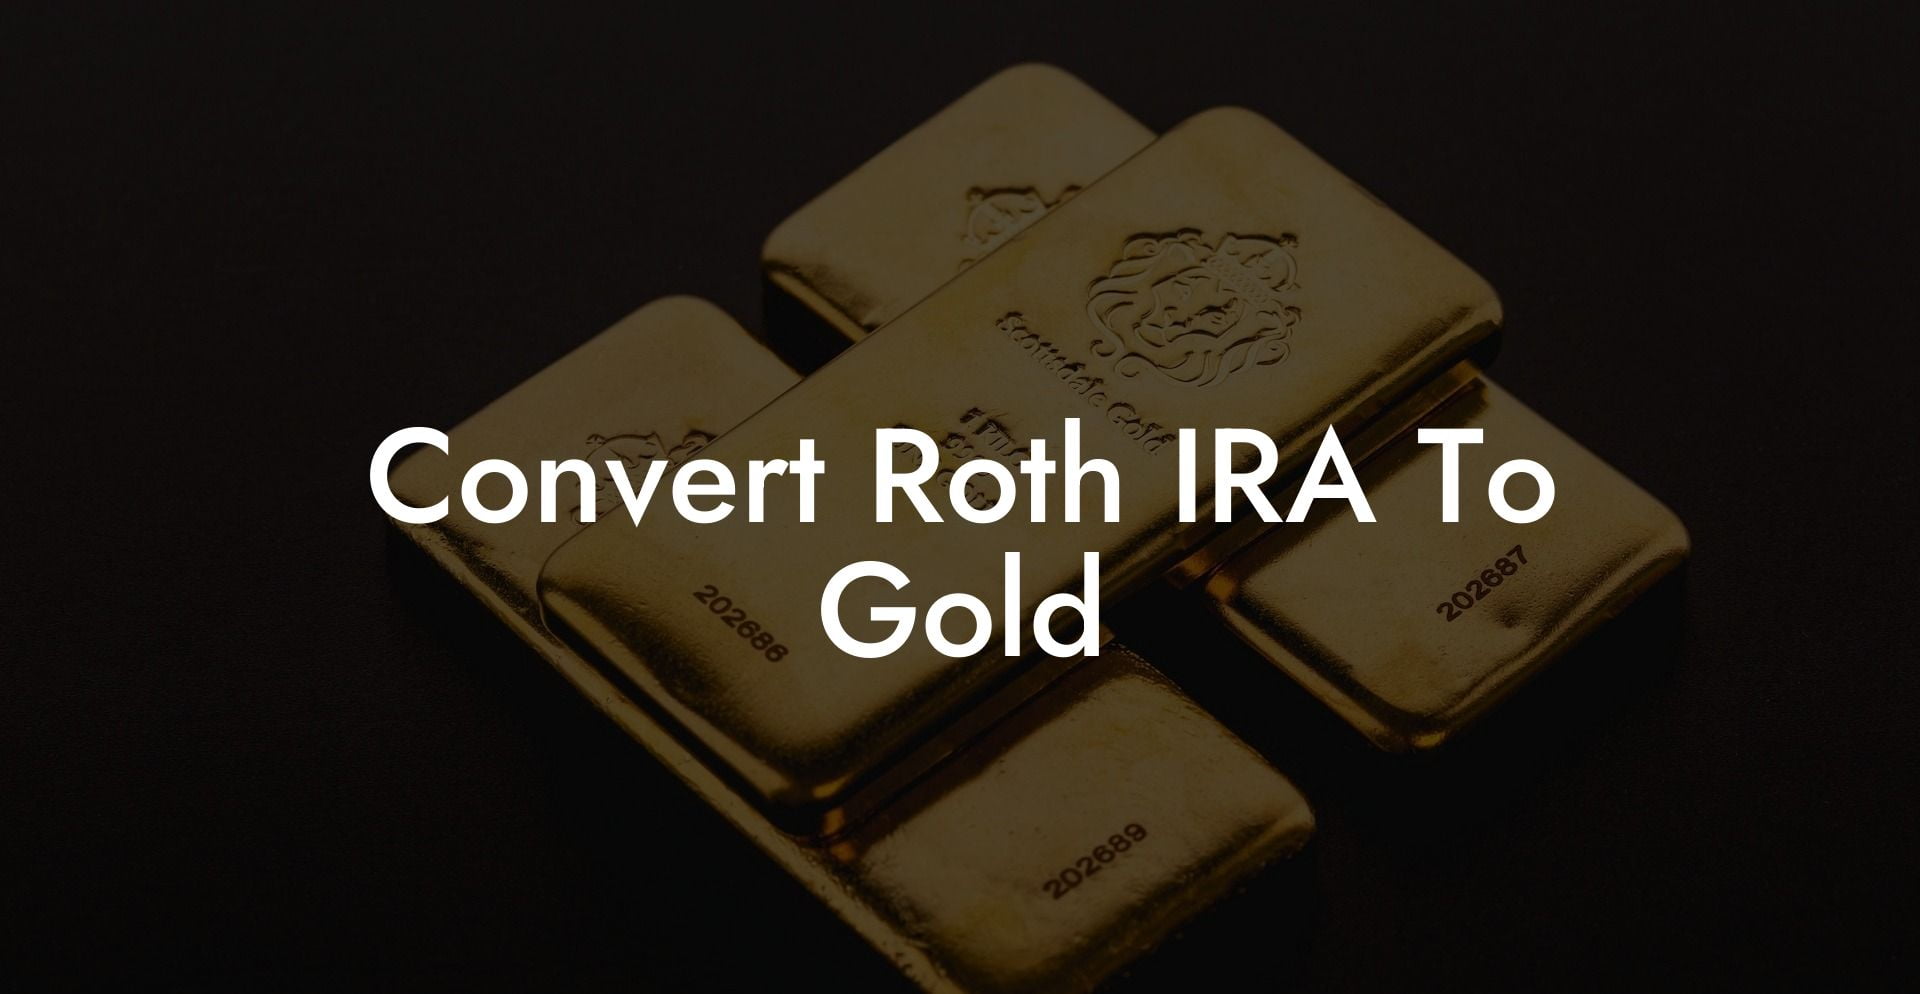 Convert Roth IRA To Gold